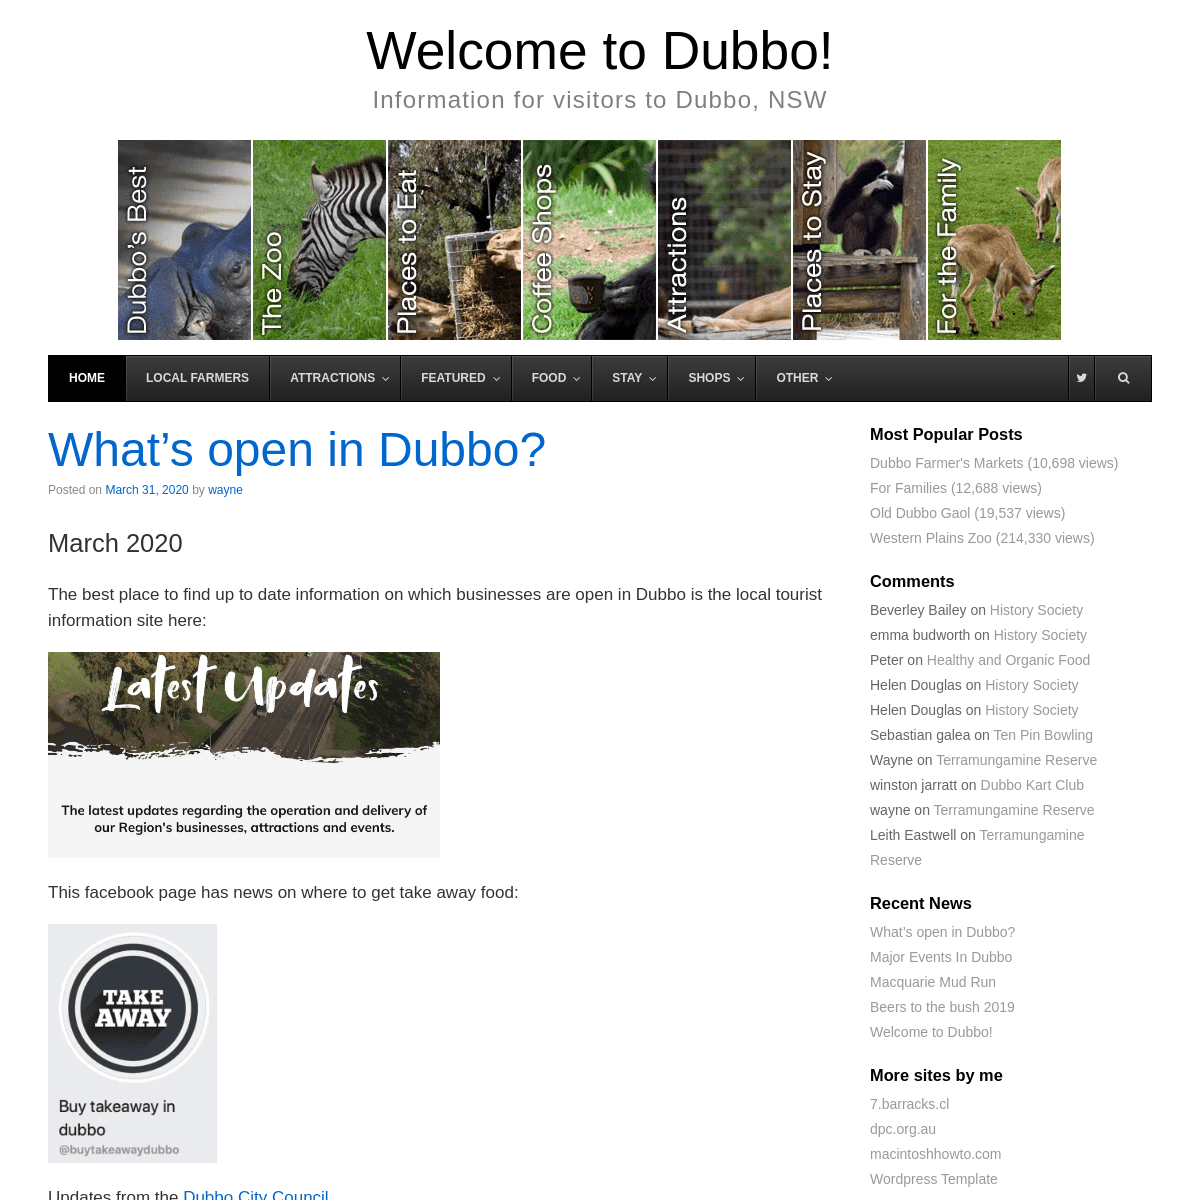 Welcome to Dubbo! - Information for visitors to Dubbo, NSW